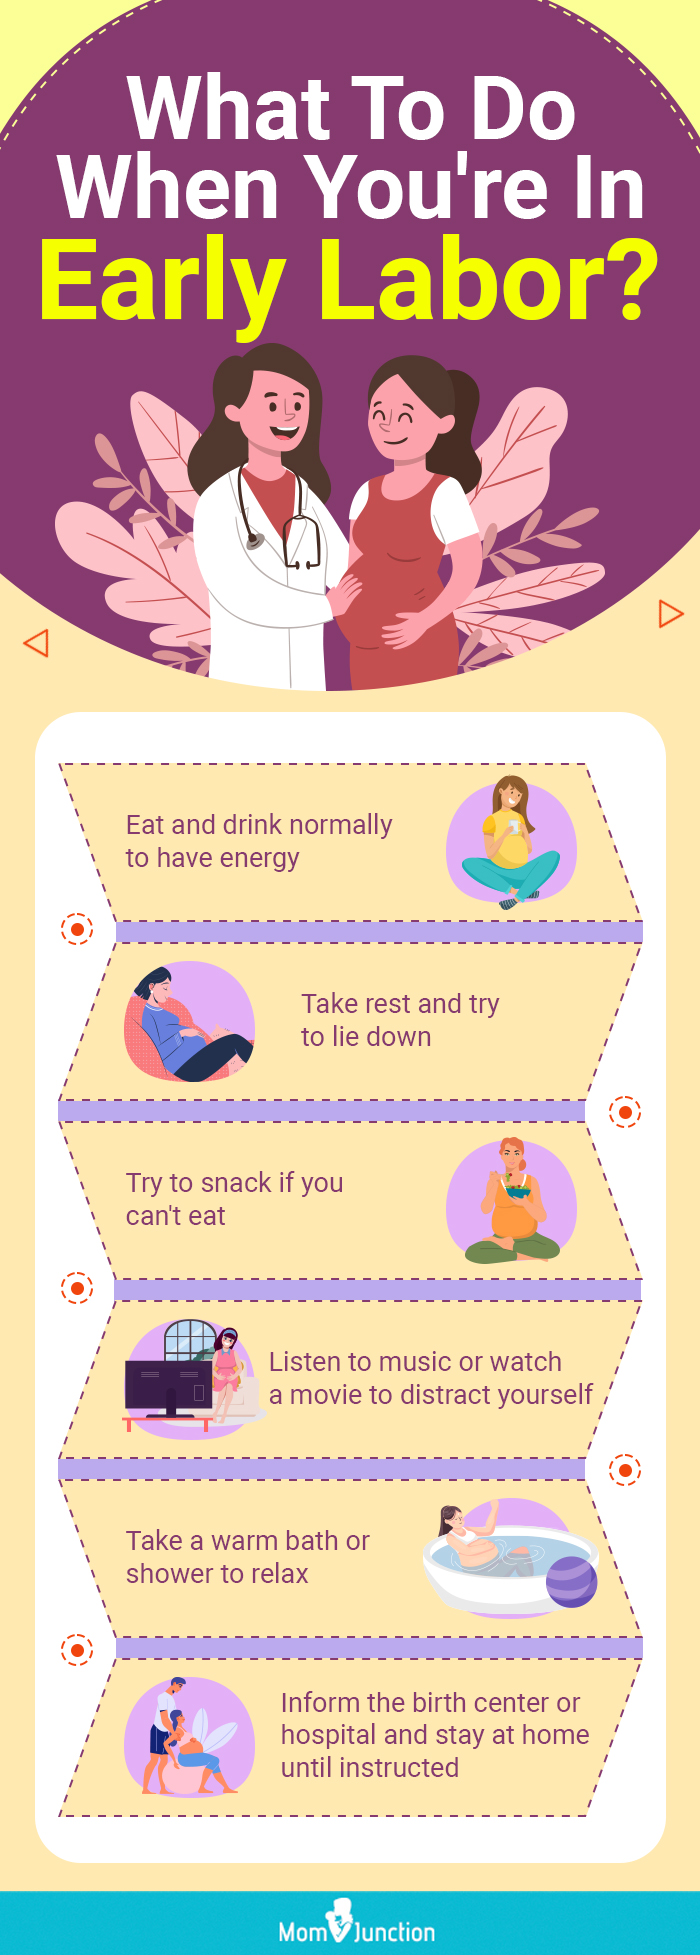 what to do when you're in early labor [infographic]